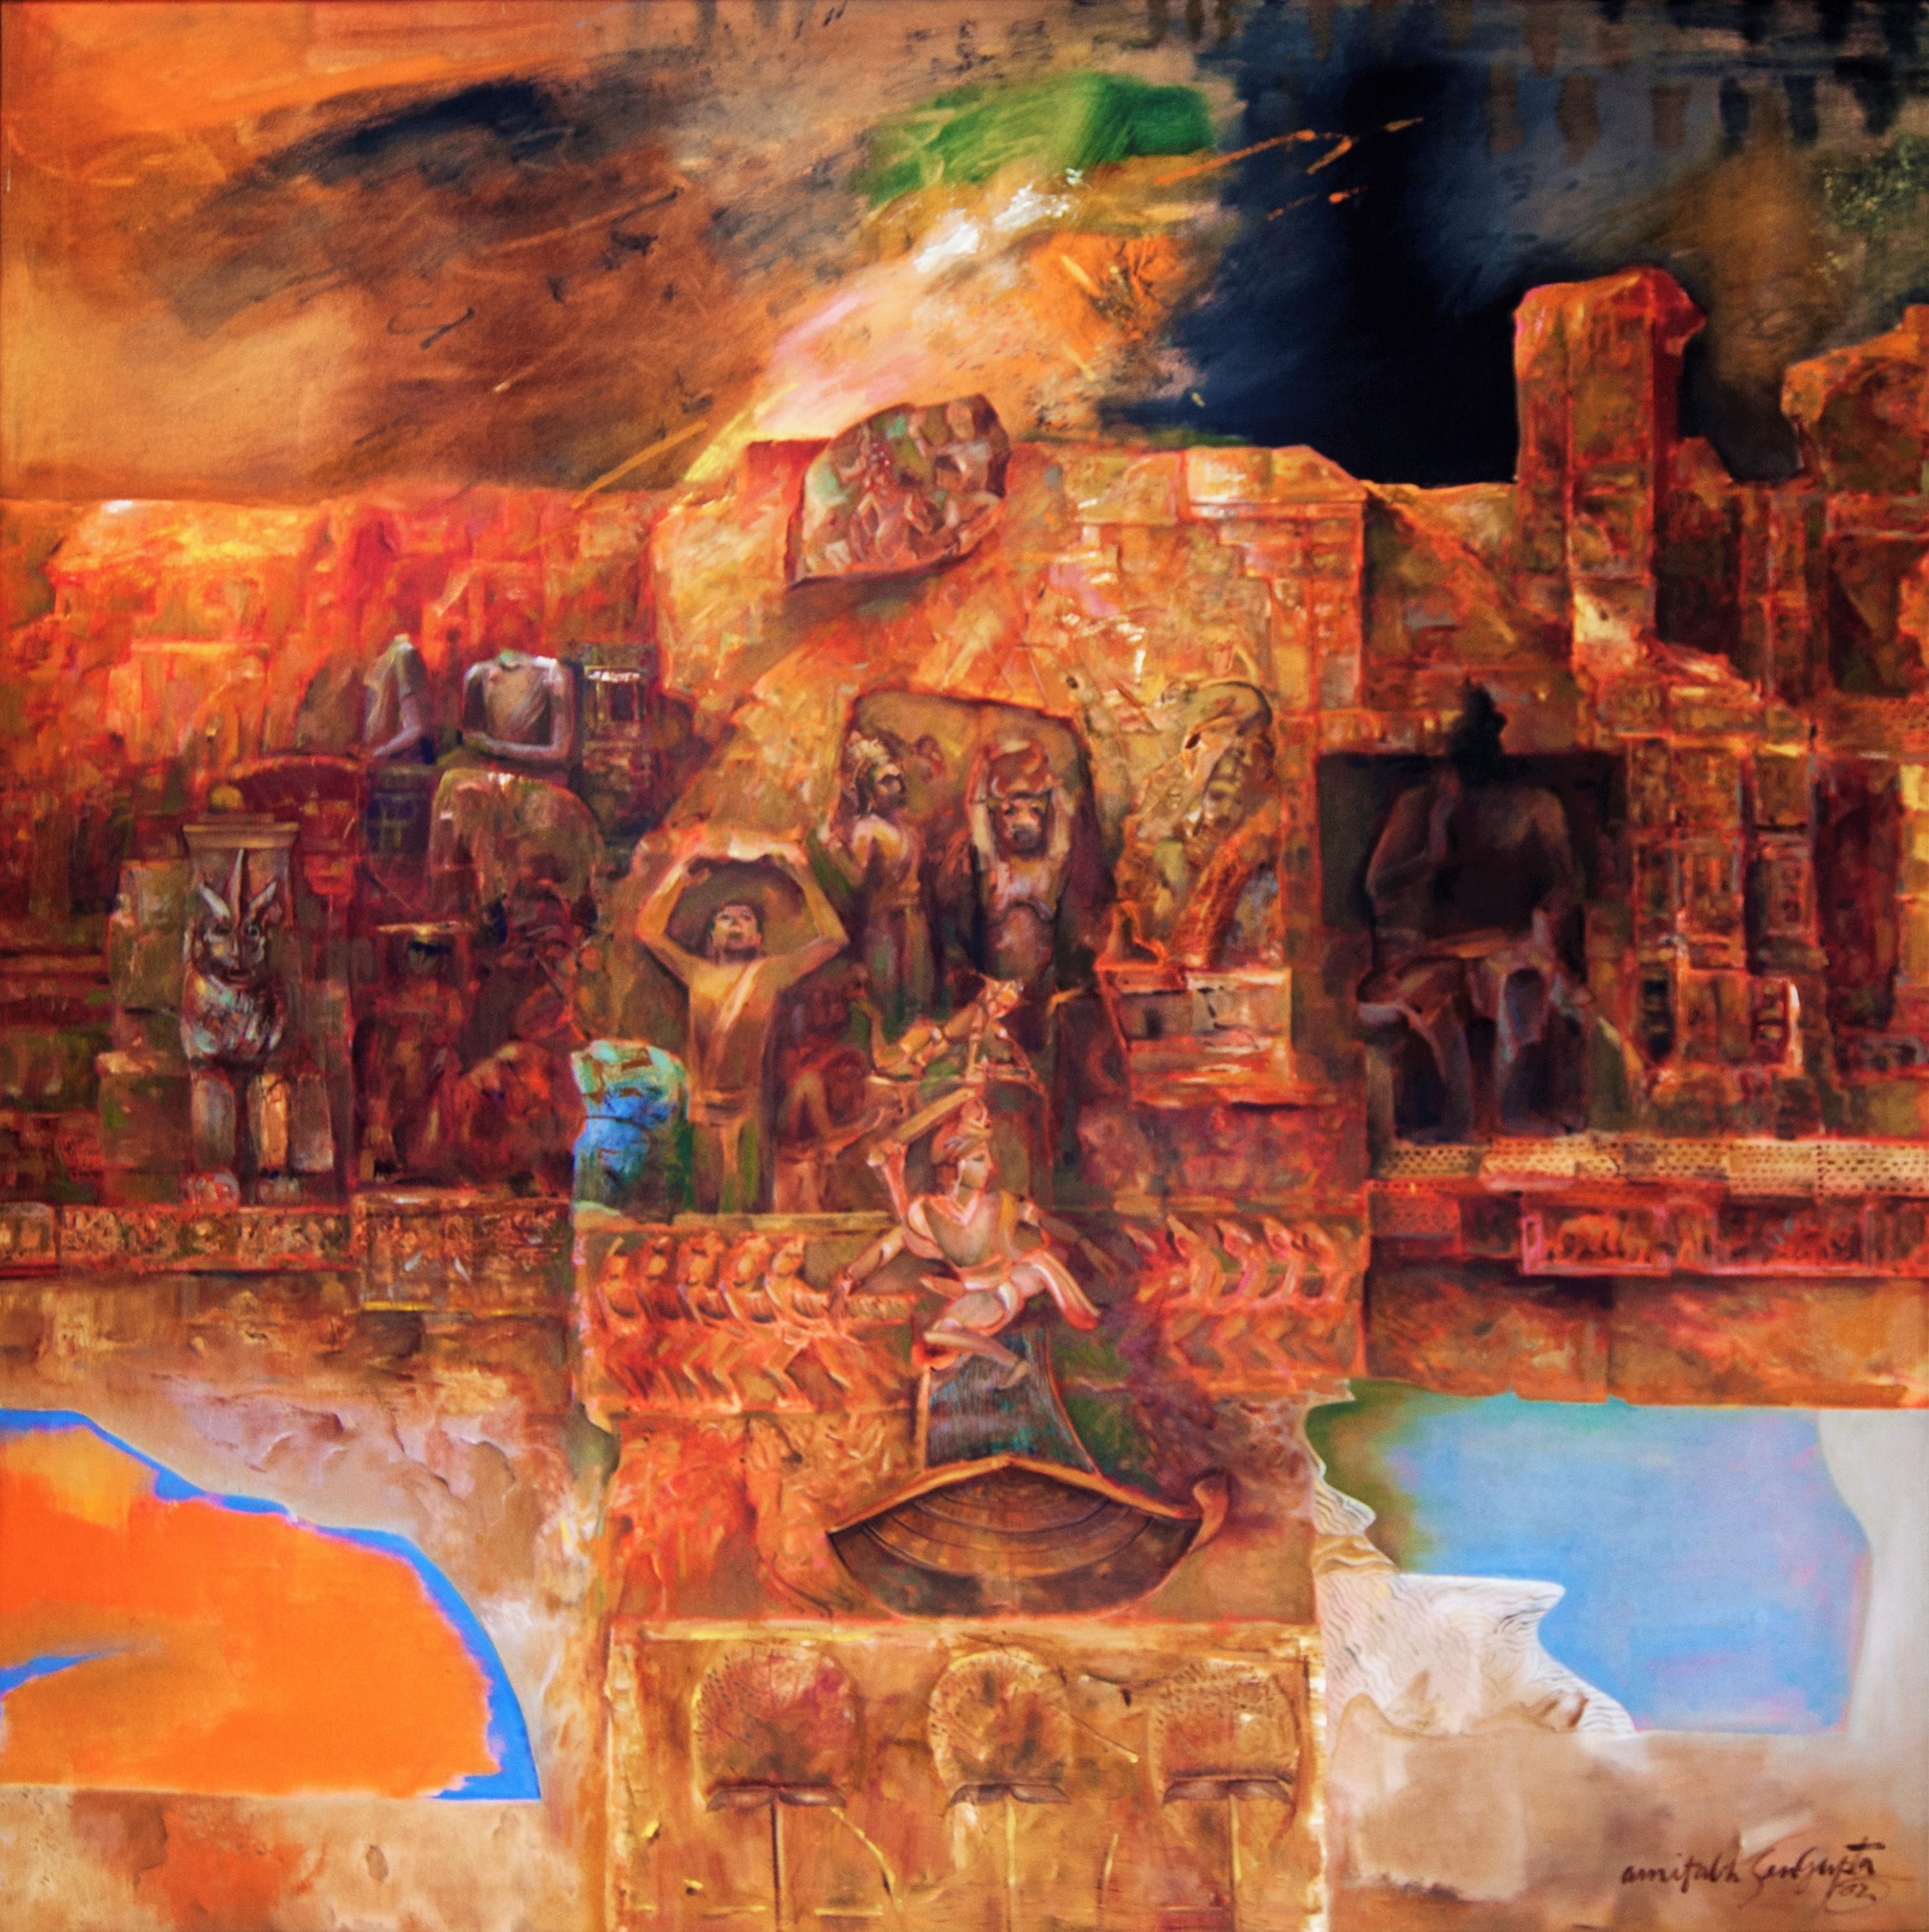 Amitabh Sengupta Abstract Painting - Changing Rock II, Abstract, Mythscape Series, Mythology, Indian Artist"In Stock"